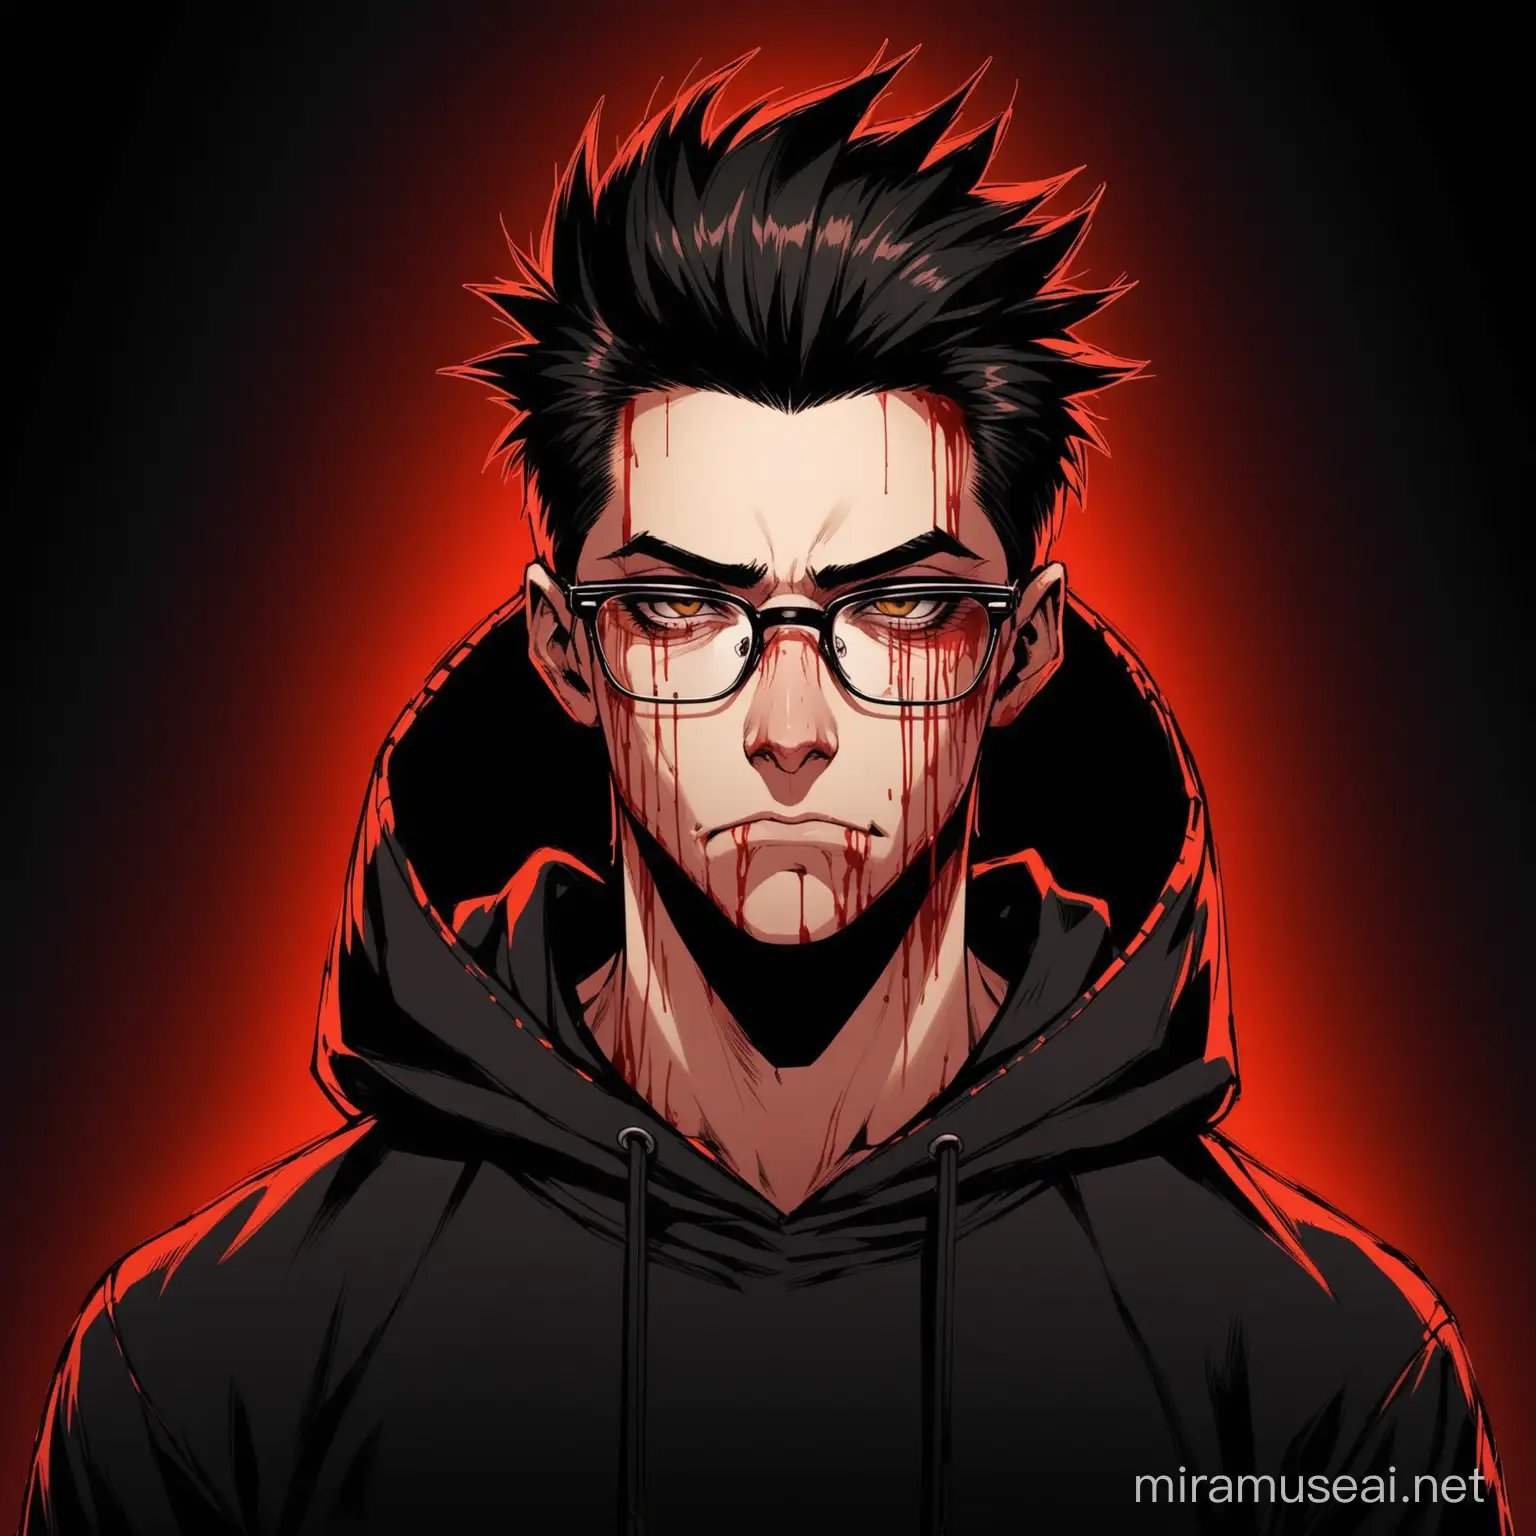 cool,hacker,quiff hairs,aesthetic,black hoodie,handsome,oblong face,big nose,small mouh,glasses,black background,psycho ,face in blood
